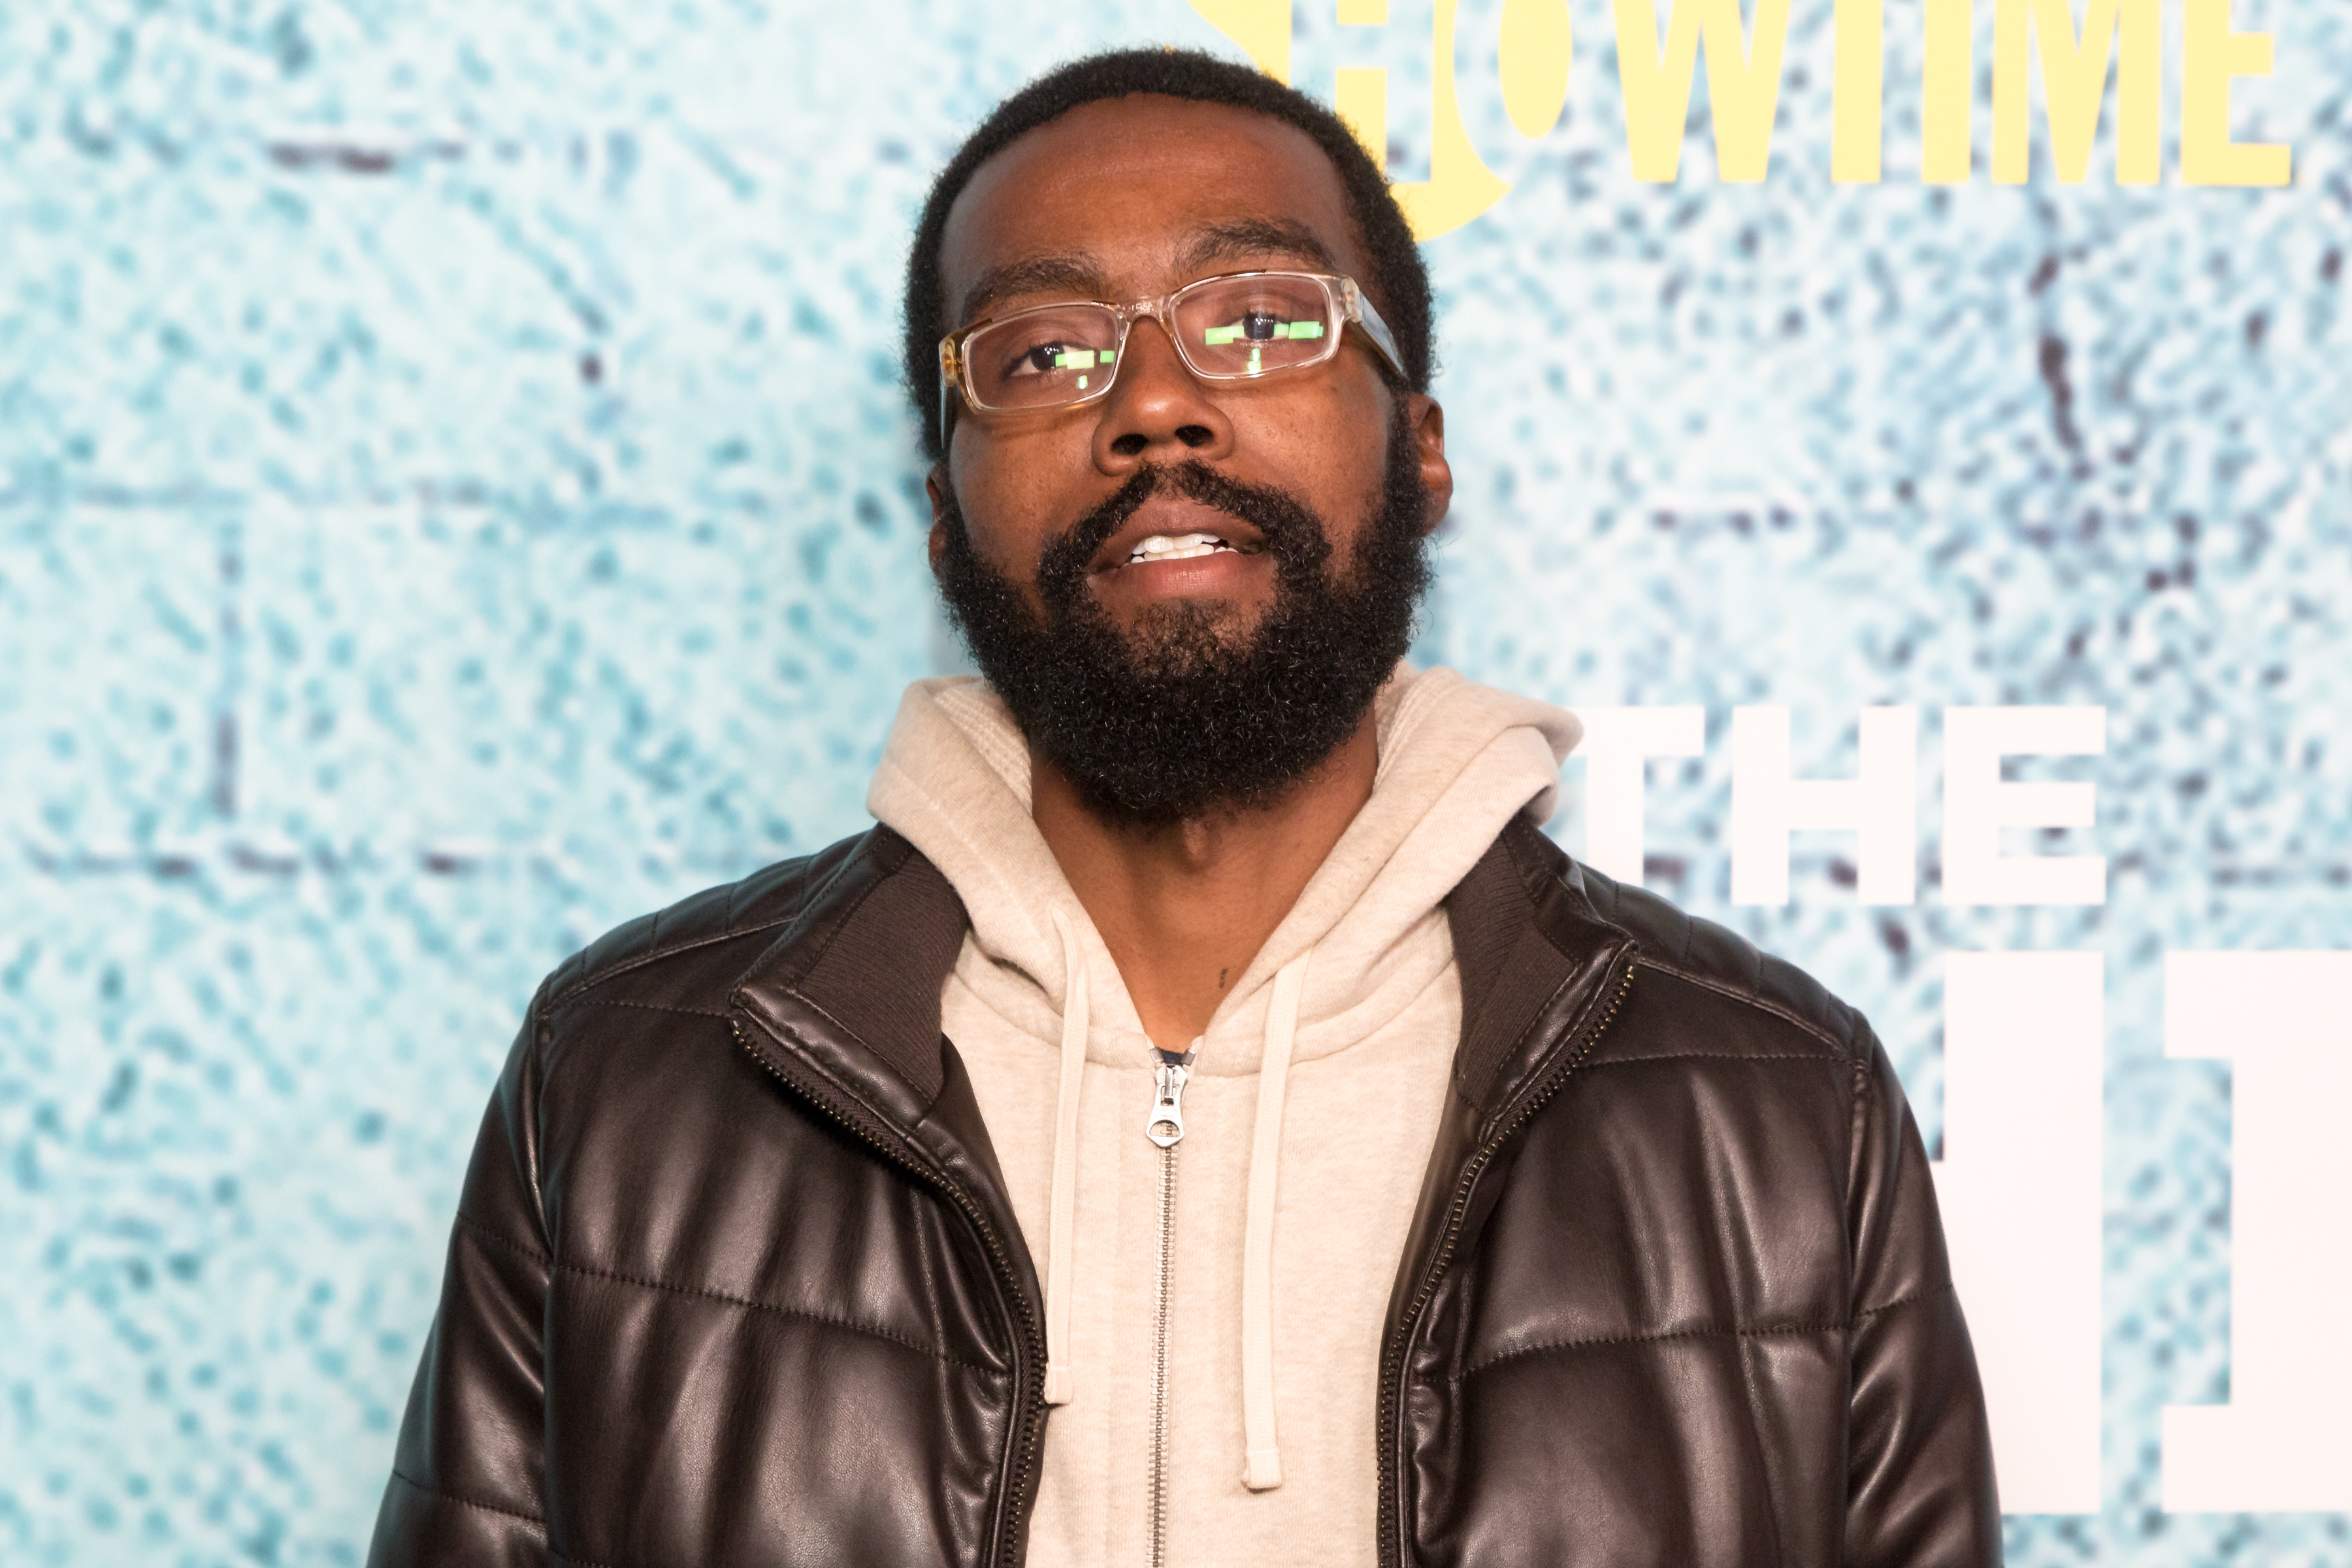 Corey Hendrix at the premiere of The Chi wearing a dark jacket and hoodie underneath with a pair of clear glasses